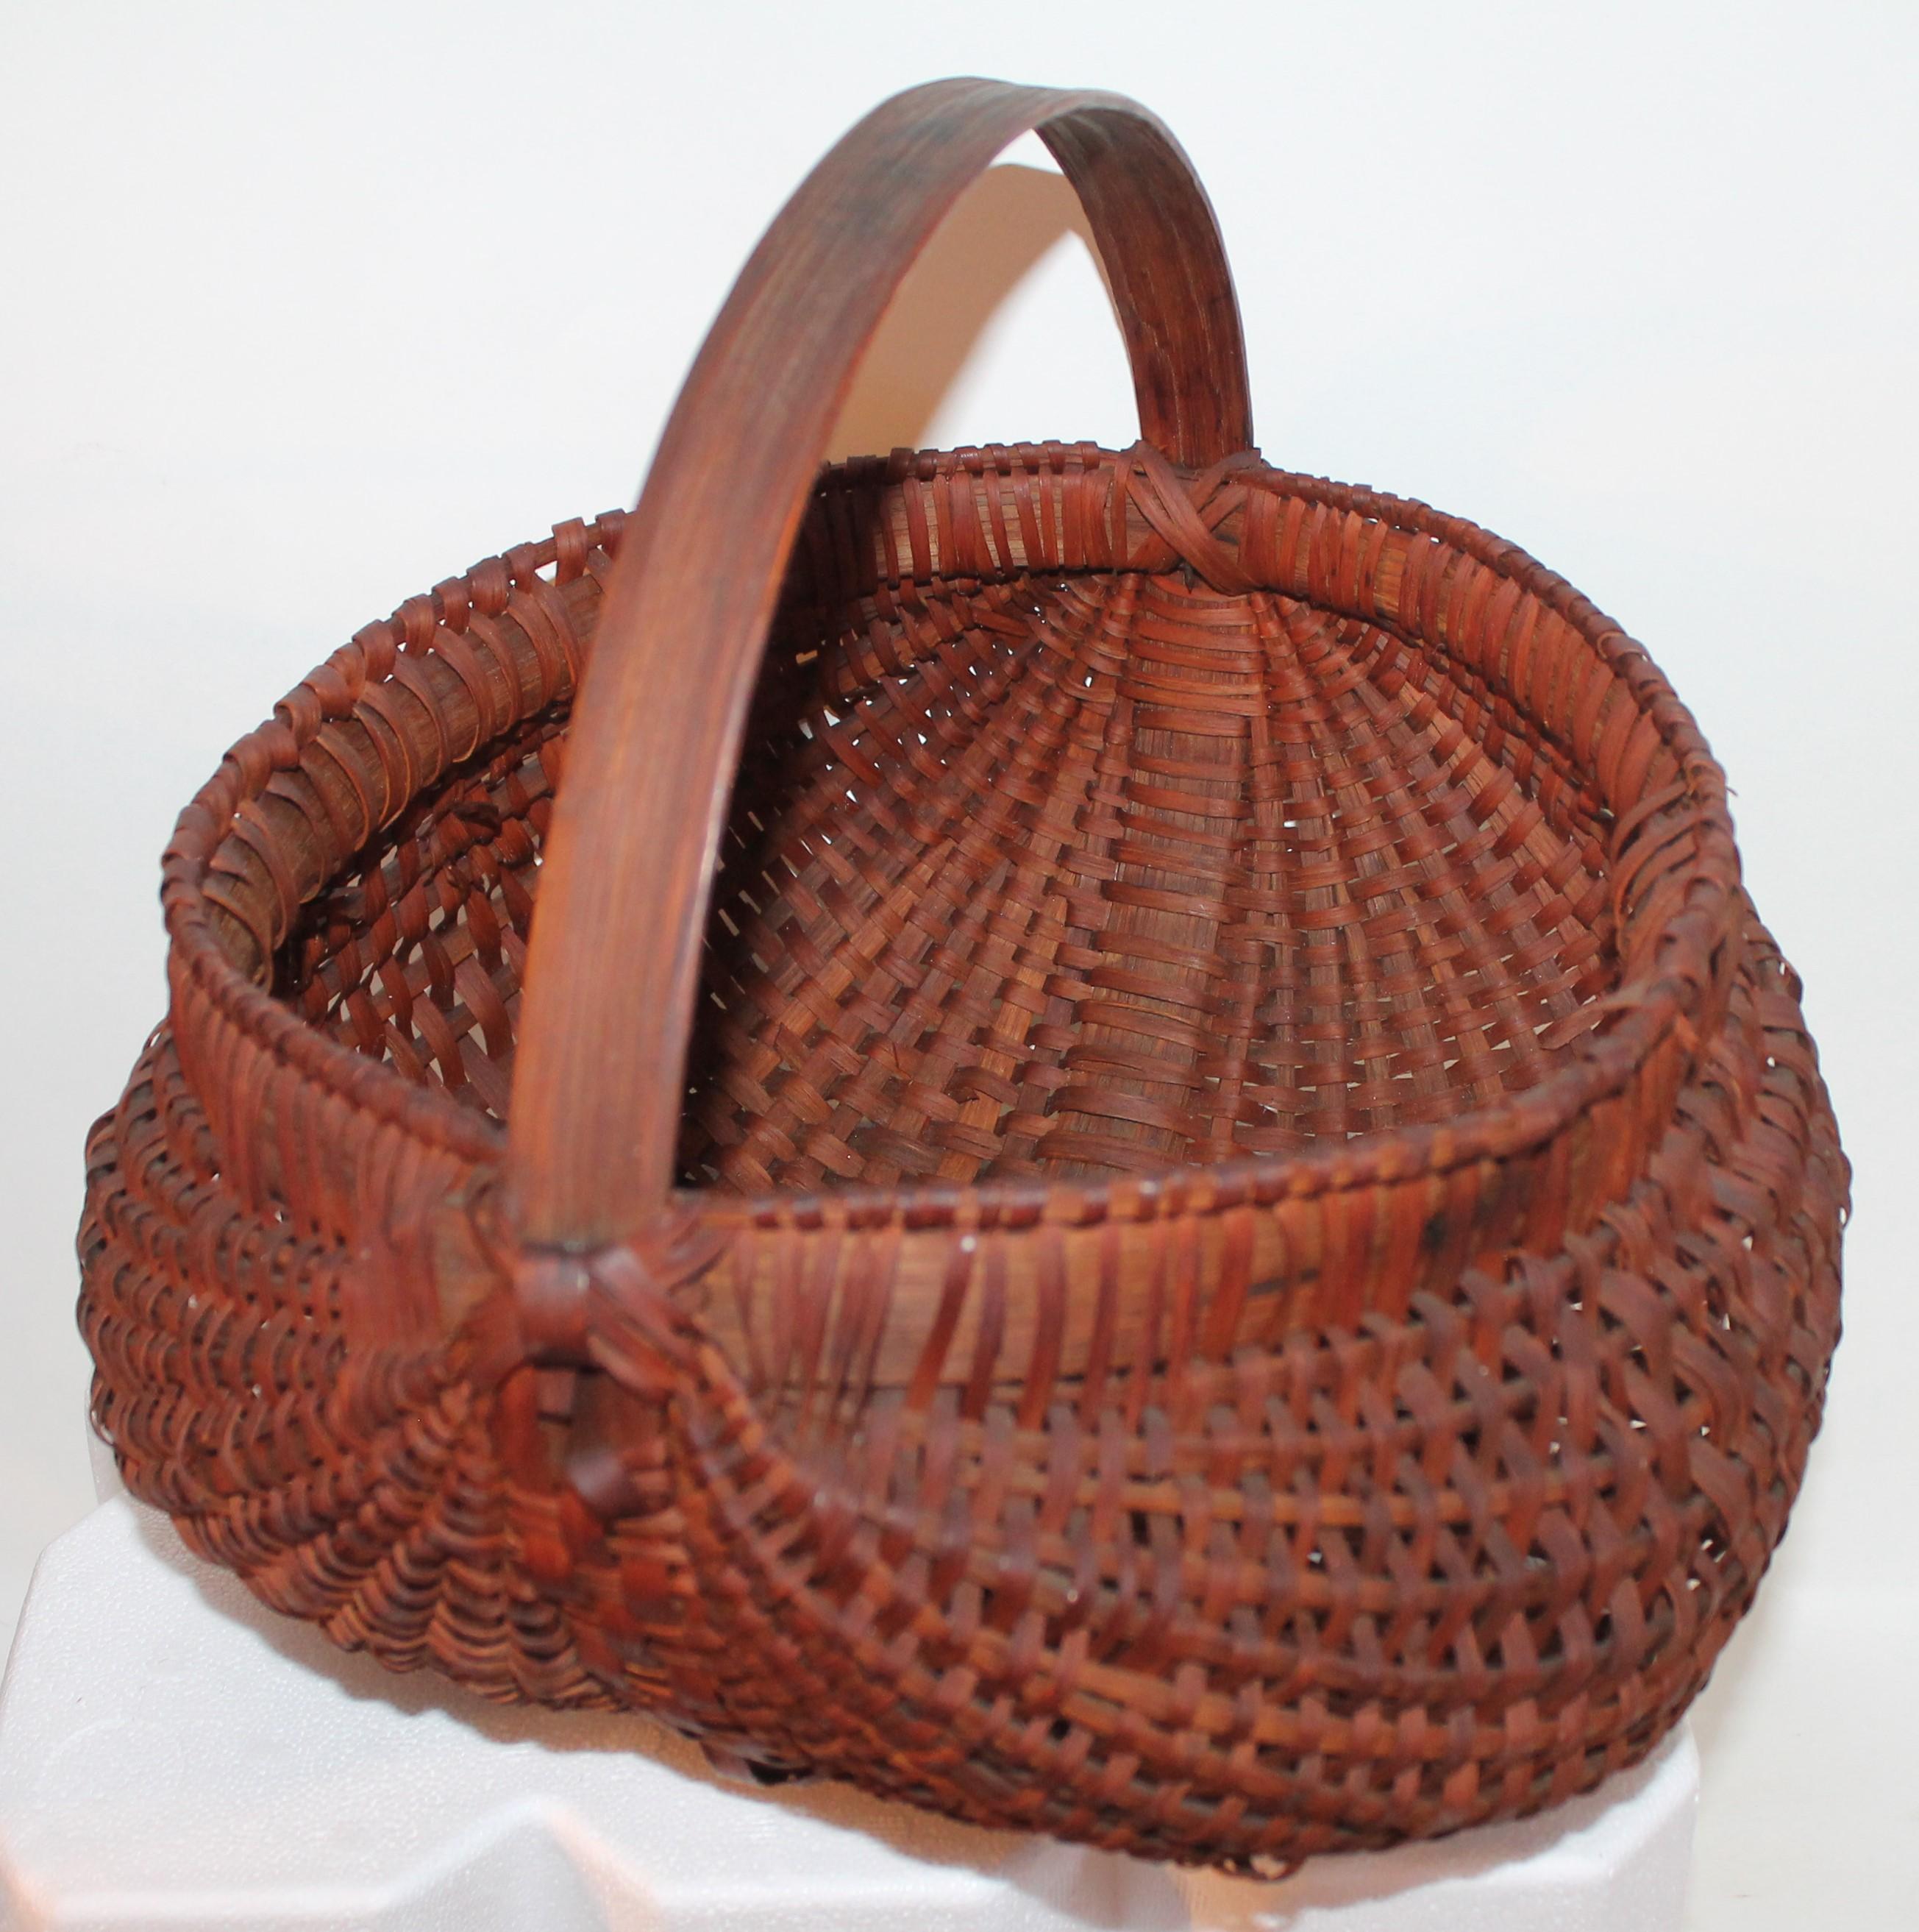 Hand-Crafted 19th Century Basket Collection from Pennsylvania / 6 Pieces